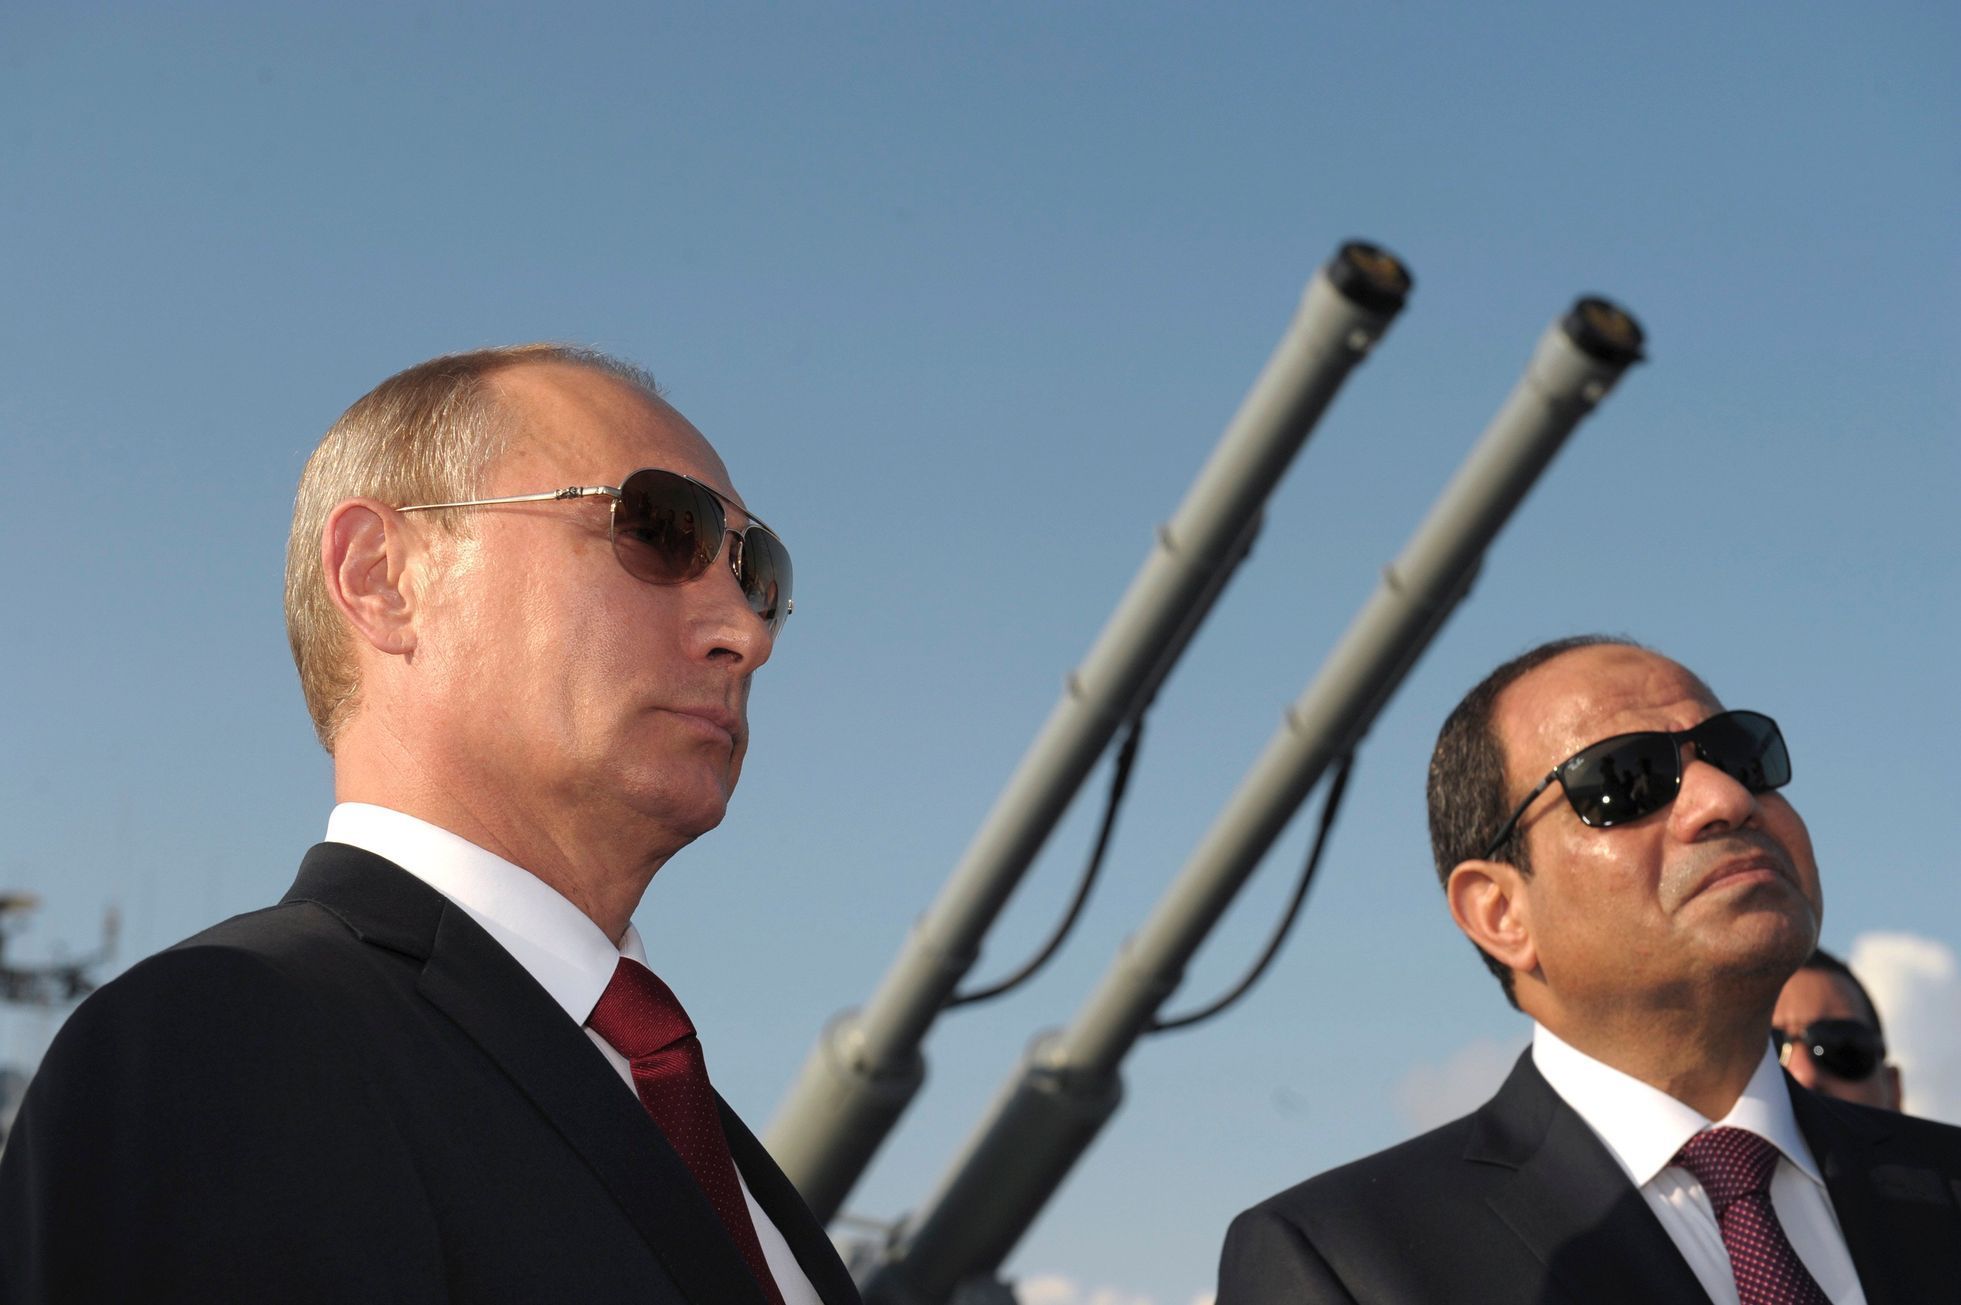 Russia's President Putin and his Egyptian counterpart Sisi attend a welcoming ceremony onboard guided missile cruiser Moskva at Sochi